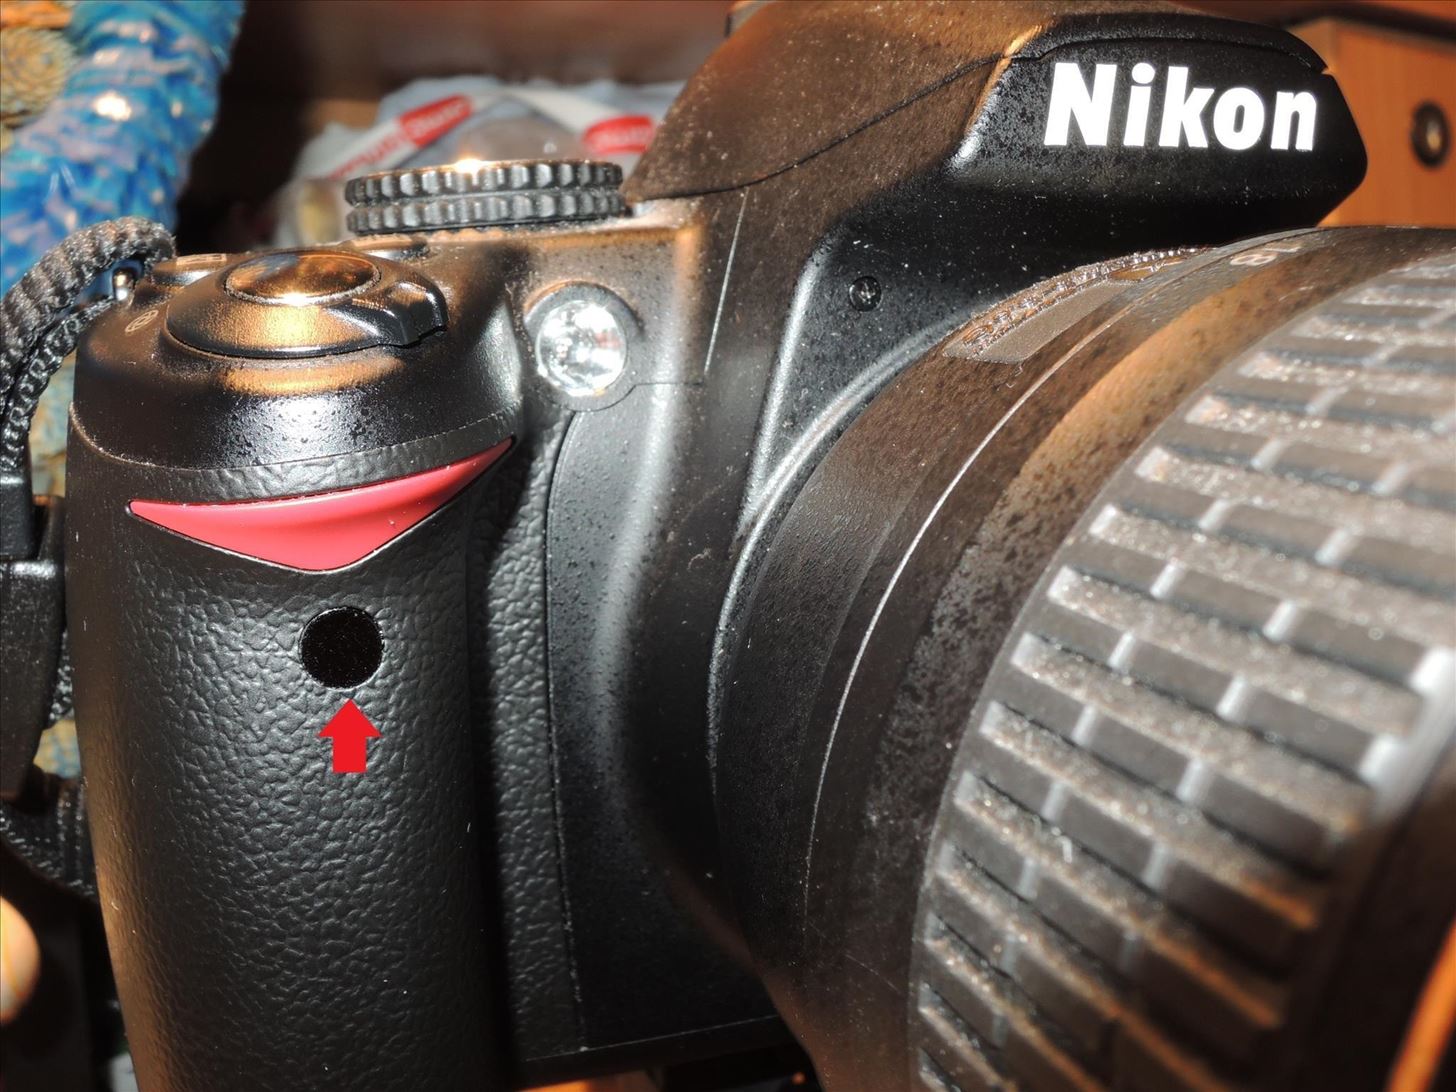 How to Turn Your Samsung Galaxy S4 into a Wireless Shutter Release Remote for Your DSLR Camera